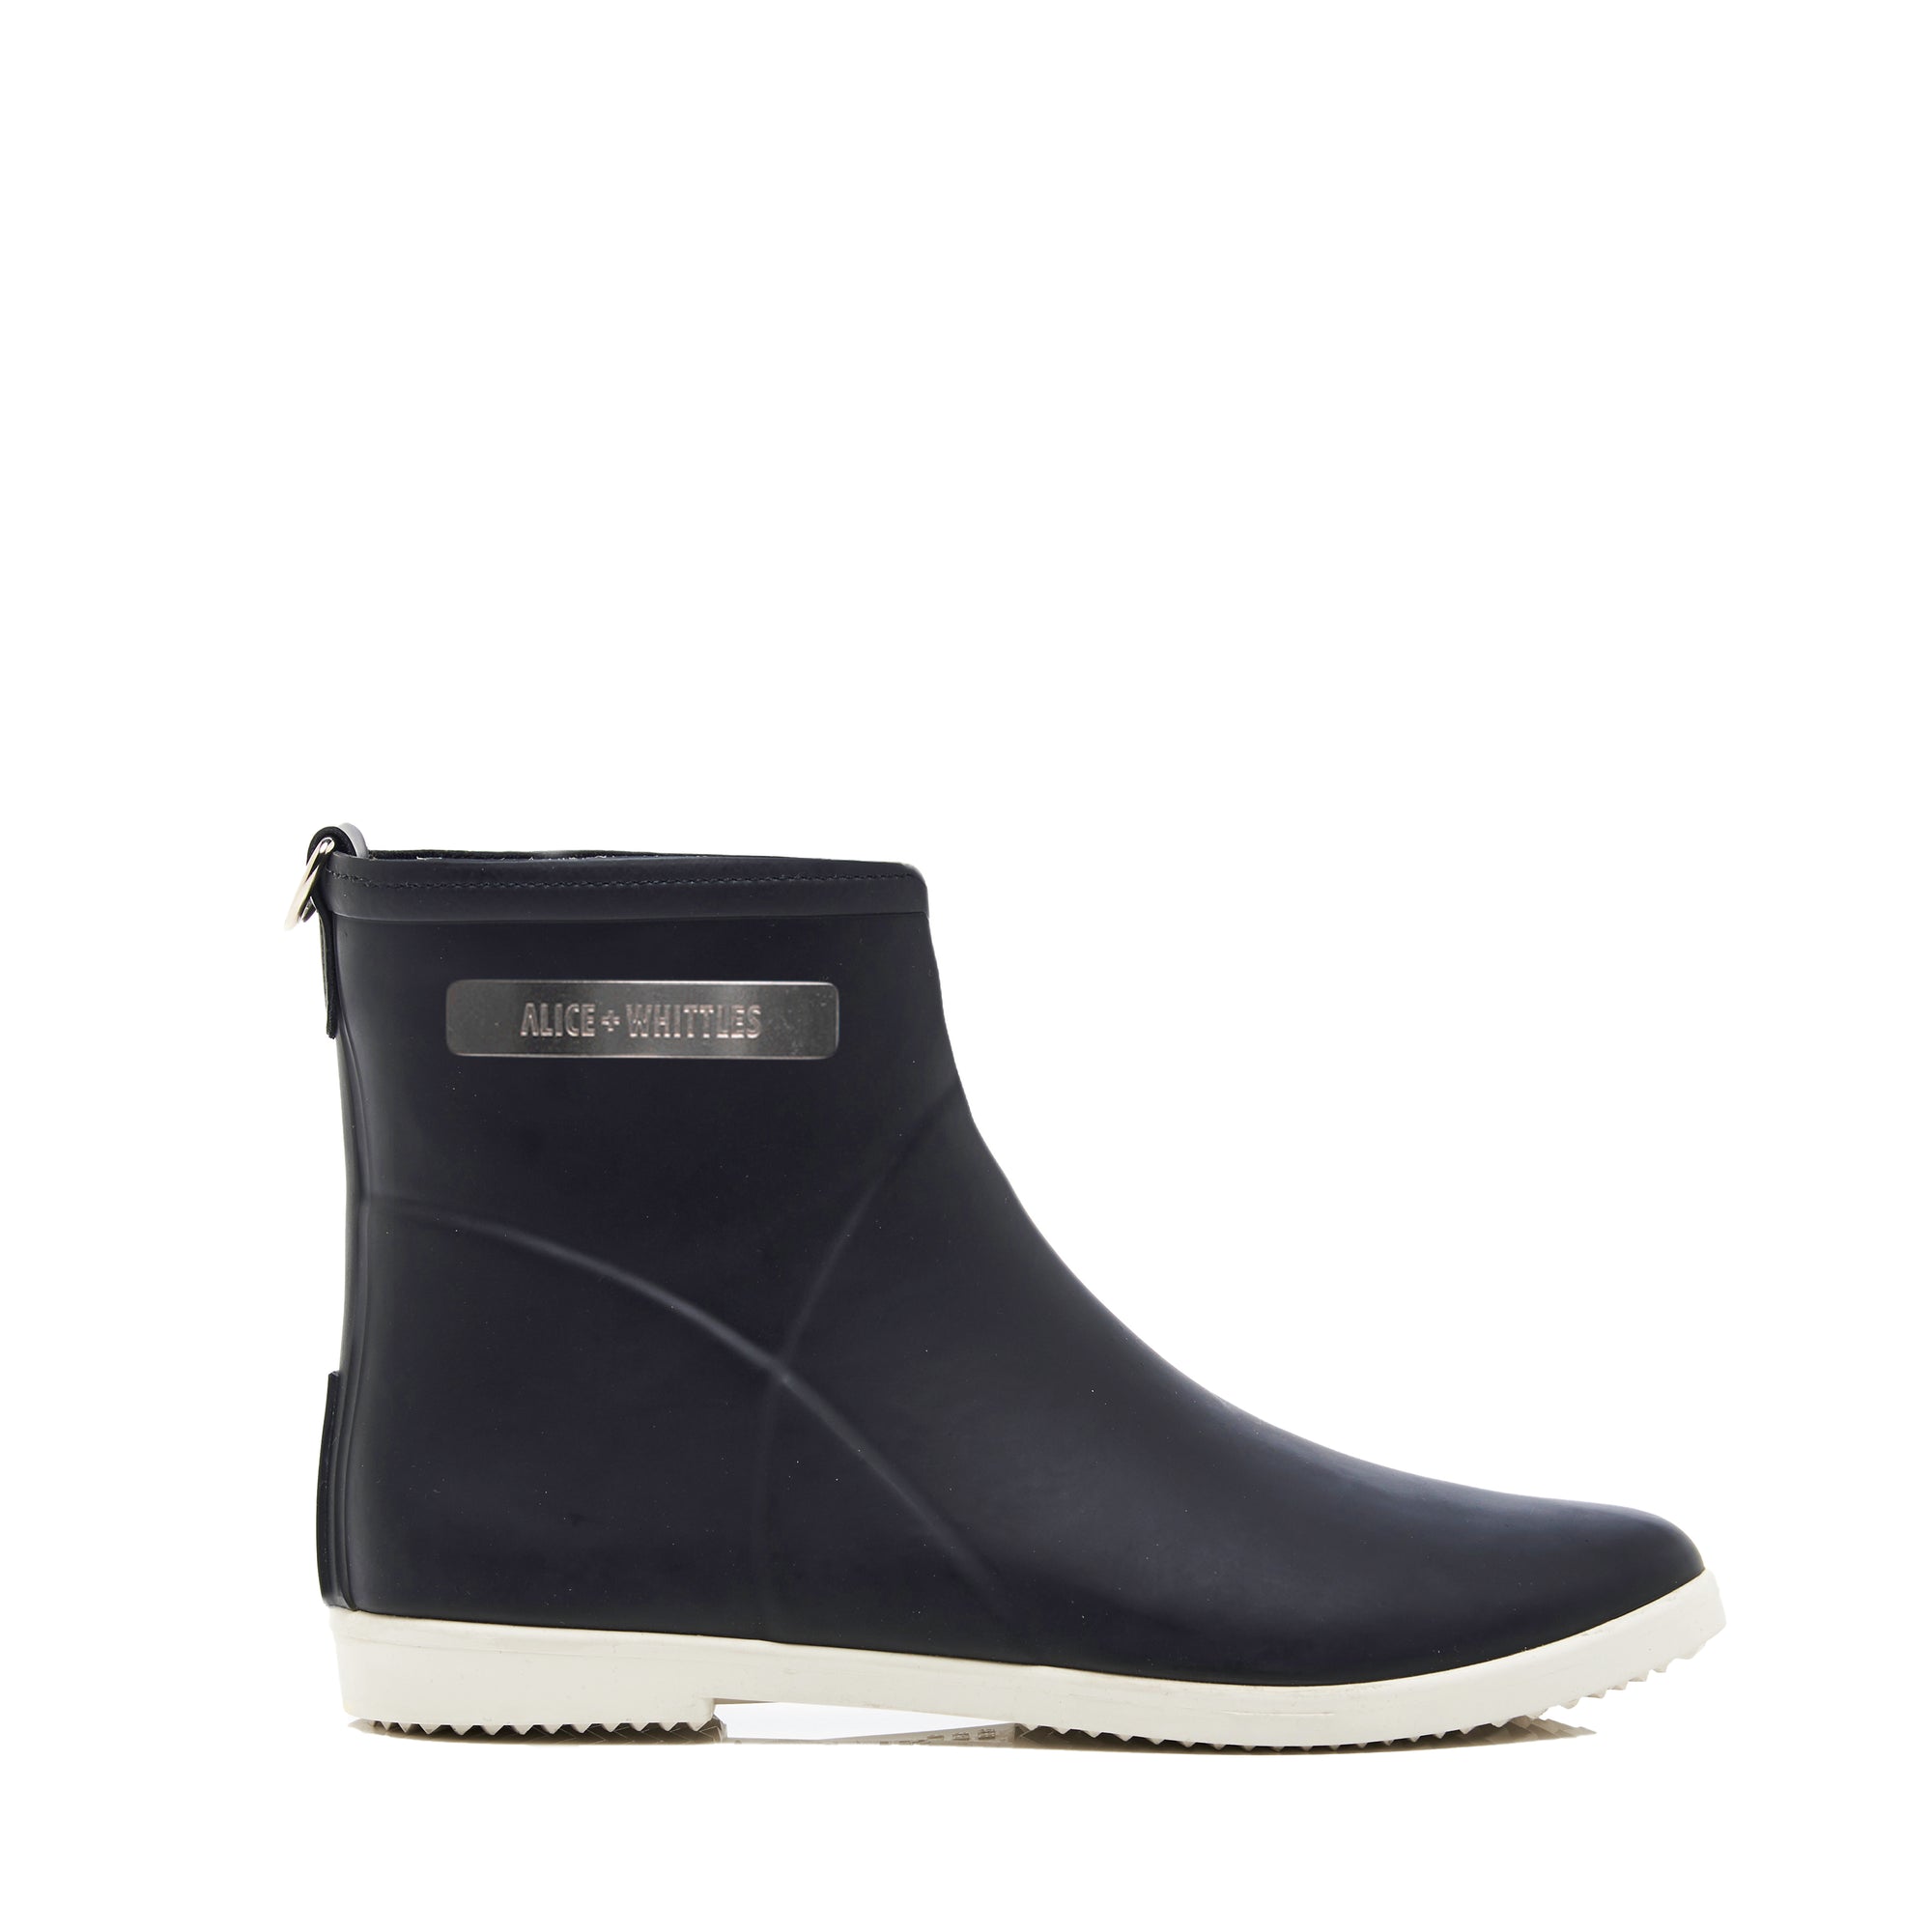 the classic black chelsea boots